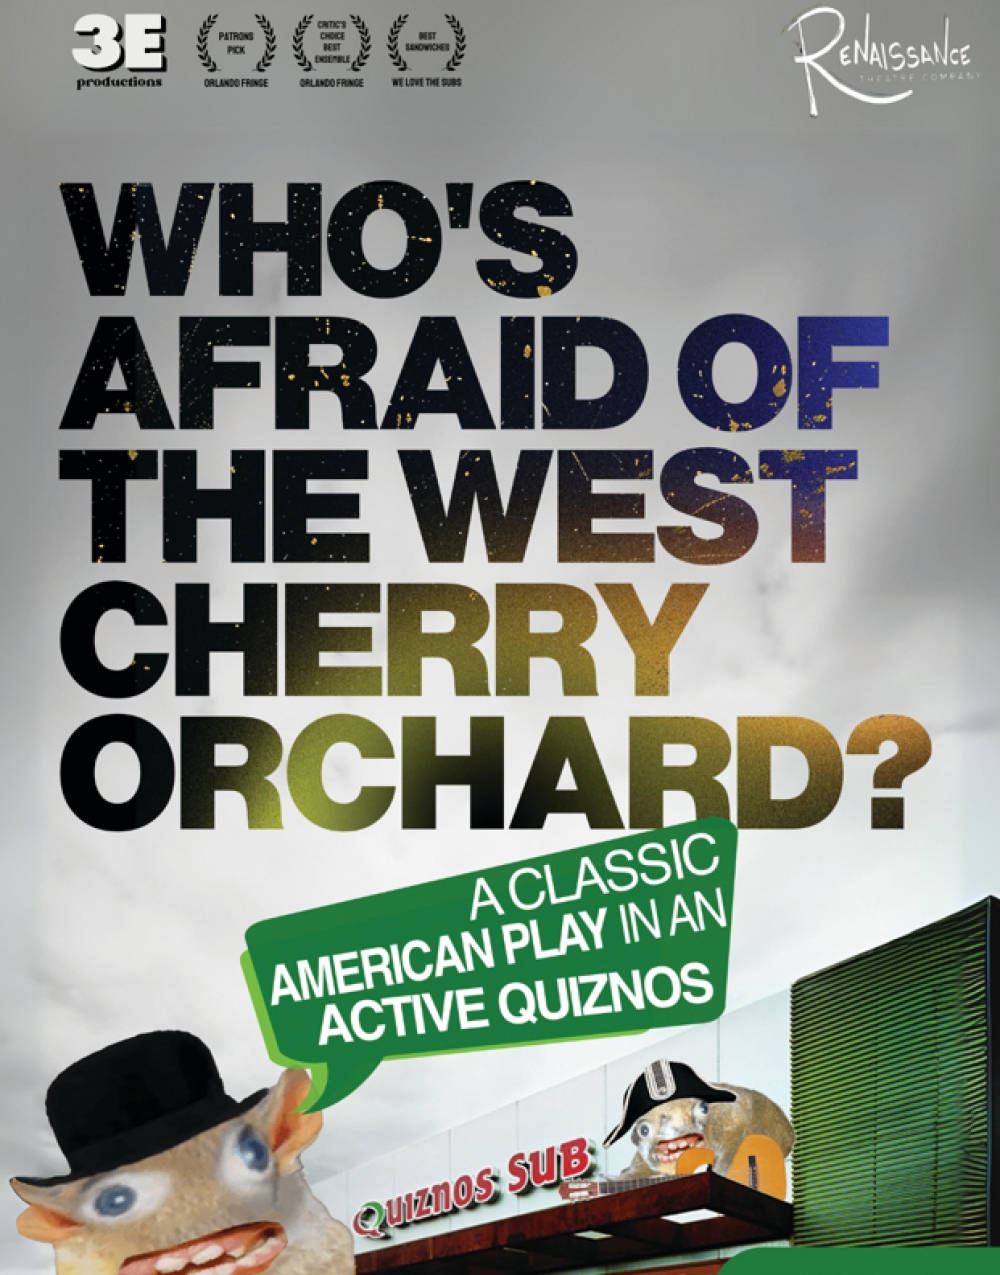 Who's Afraid of the West Cherry Orchard: A Classic American Play in an Active Quiznos at Renaissance Theatre Company: Orlando International Fringe Festival